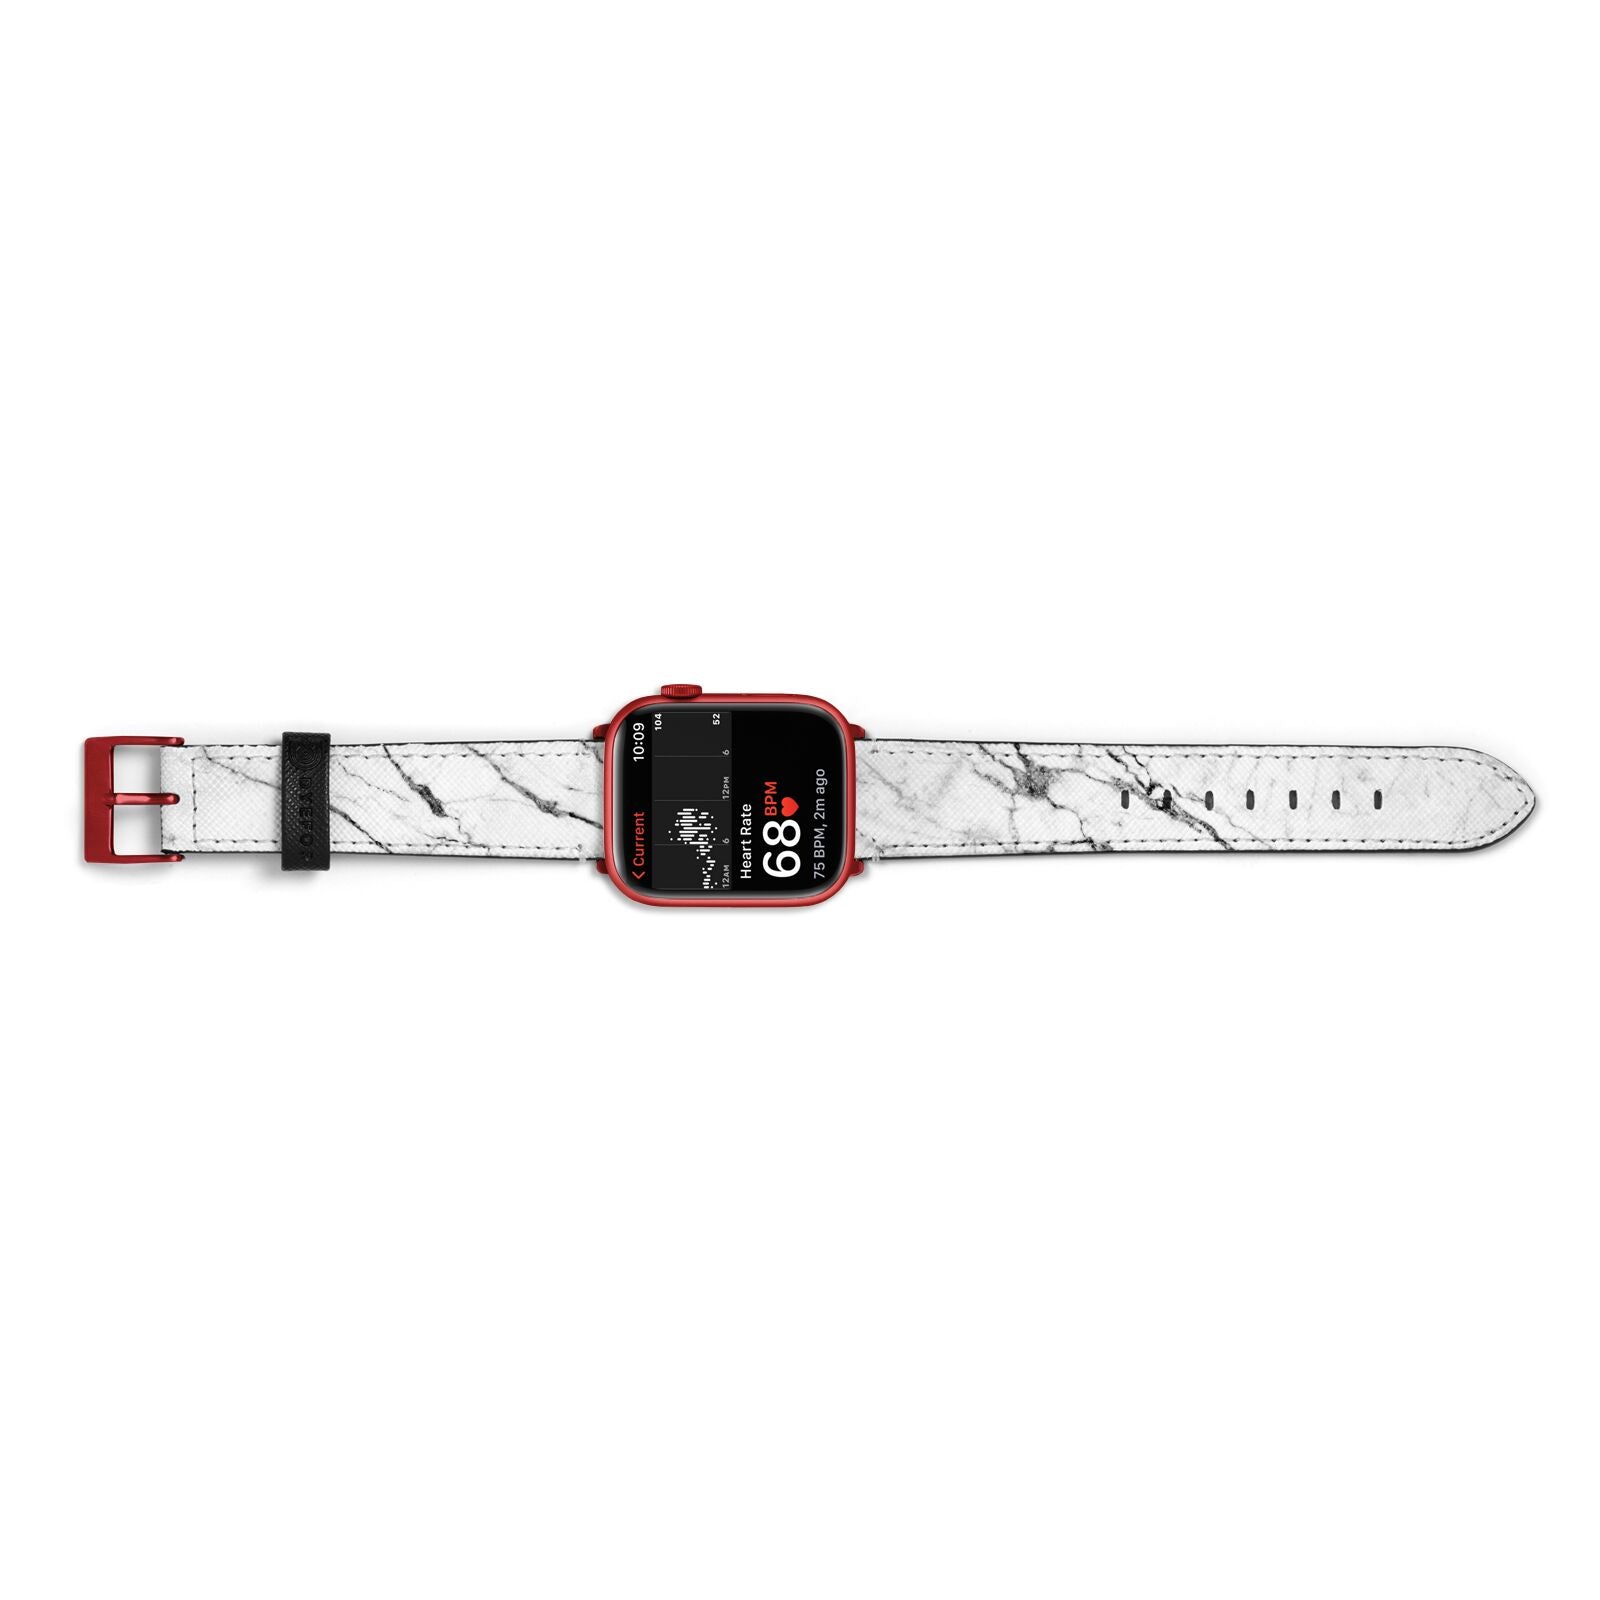 Marble White Apple Watch Strap Size 38mm Landscape Image Red Hardware